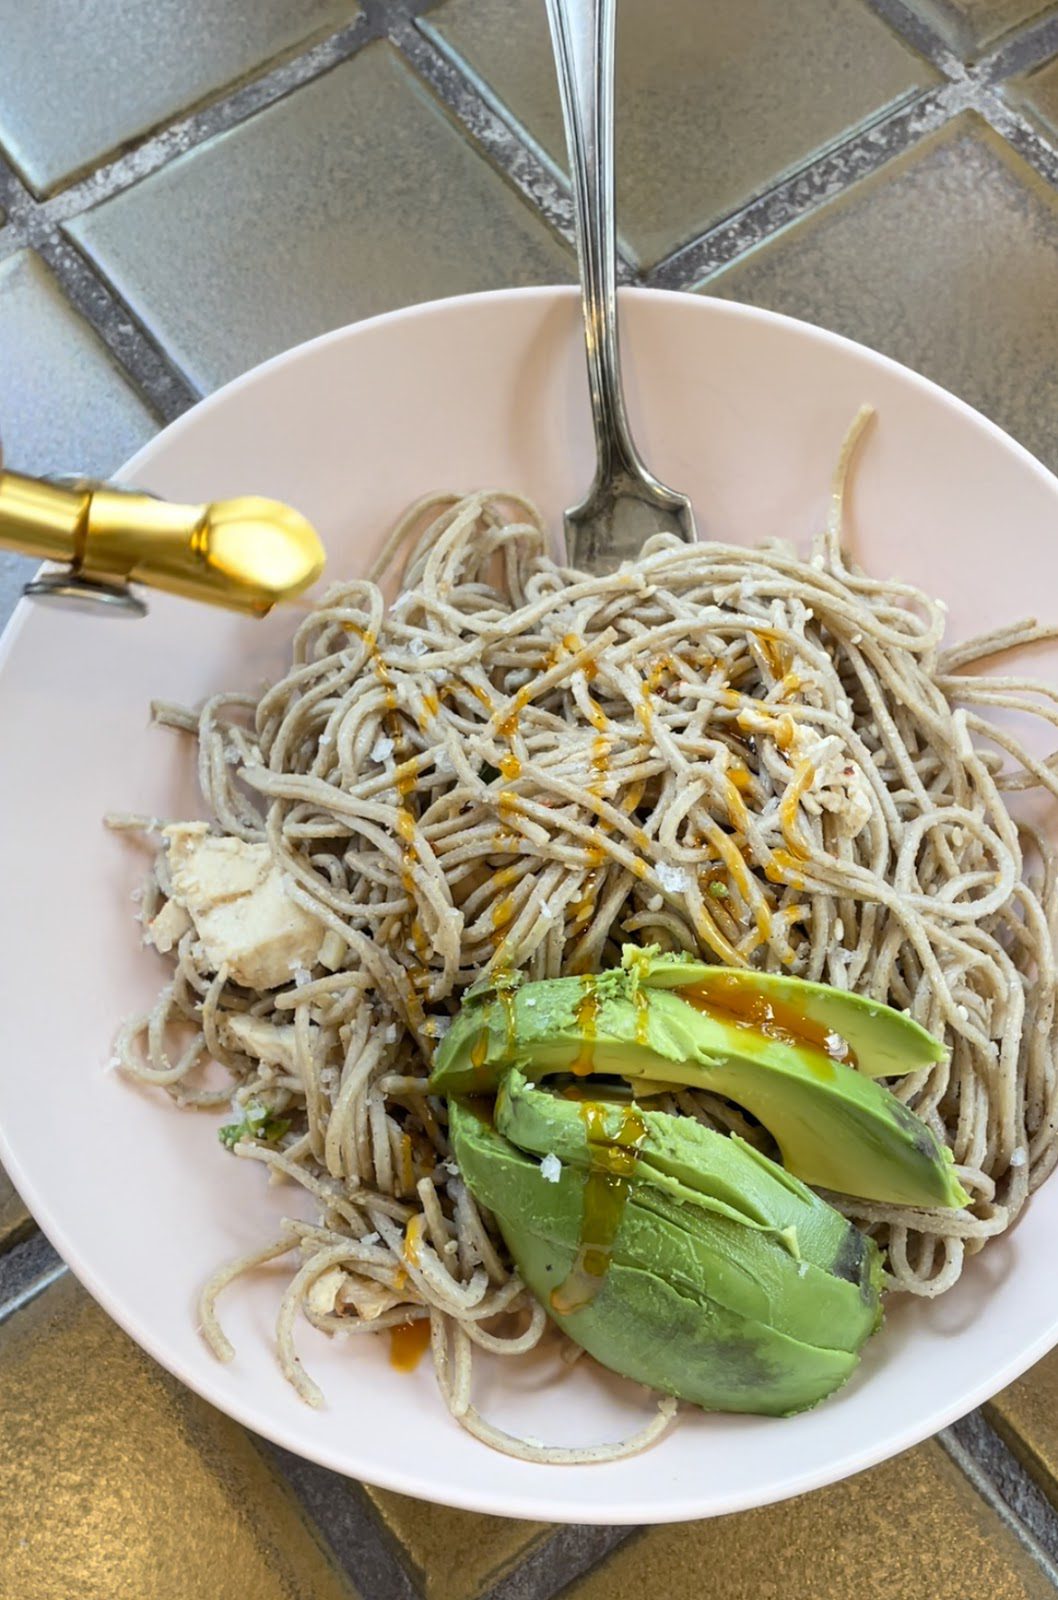 4 (Really) Simple Meals I Made and Loved This Month